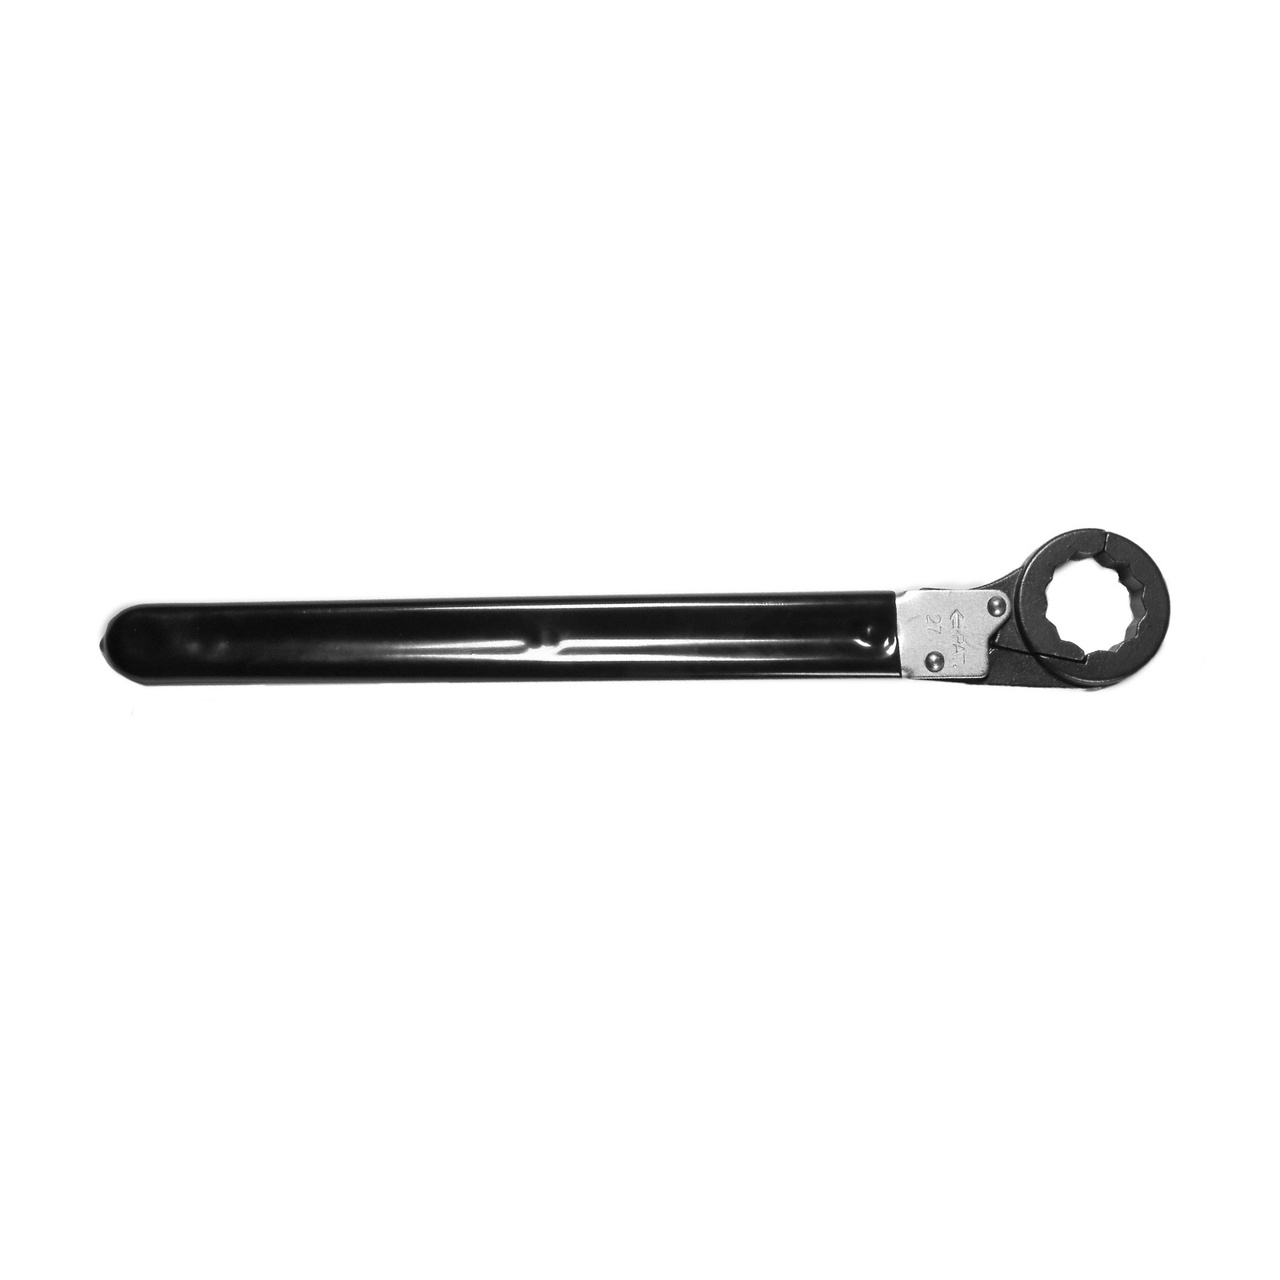 Open Ratchet Wrench 19 mm